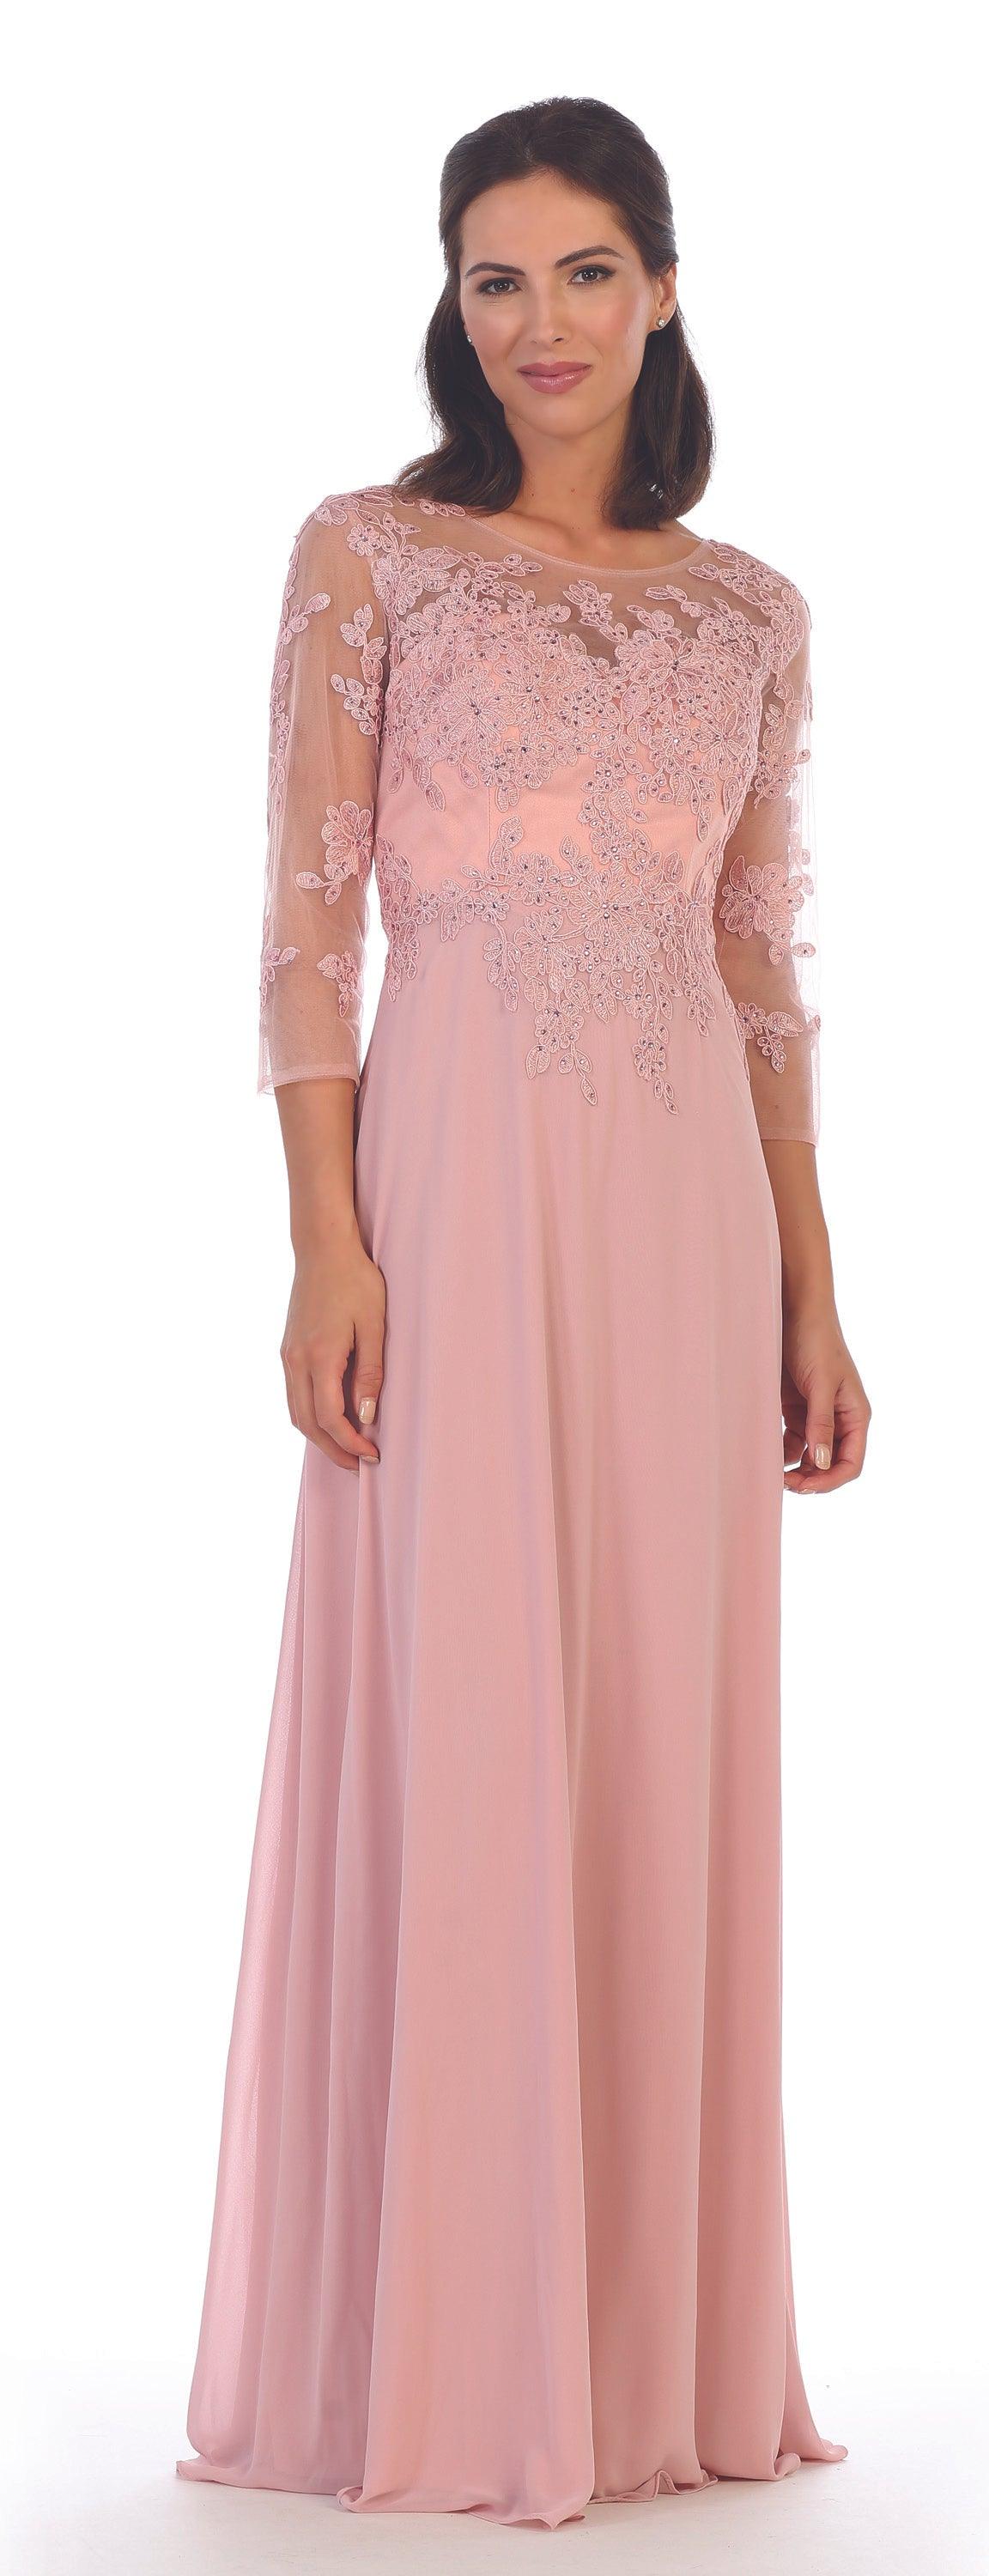 Long Mother of the Bride Formal Chiffon Dress Dusty Rose